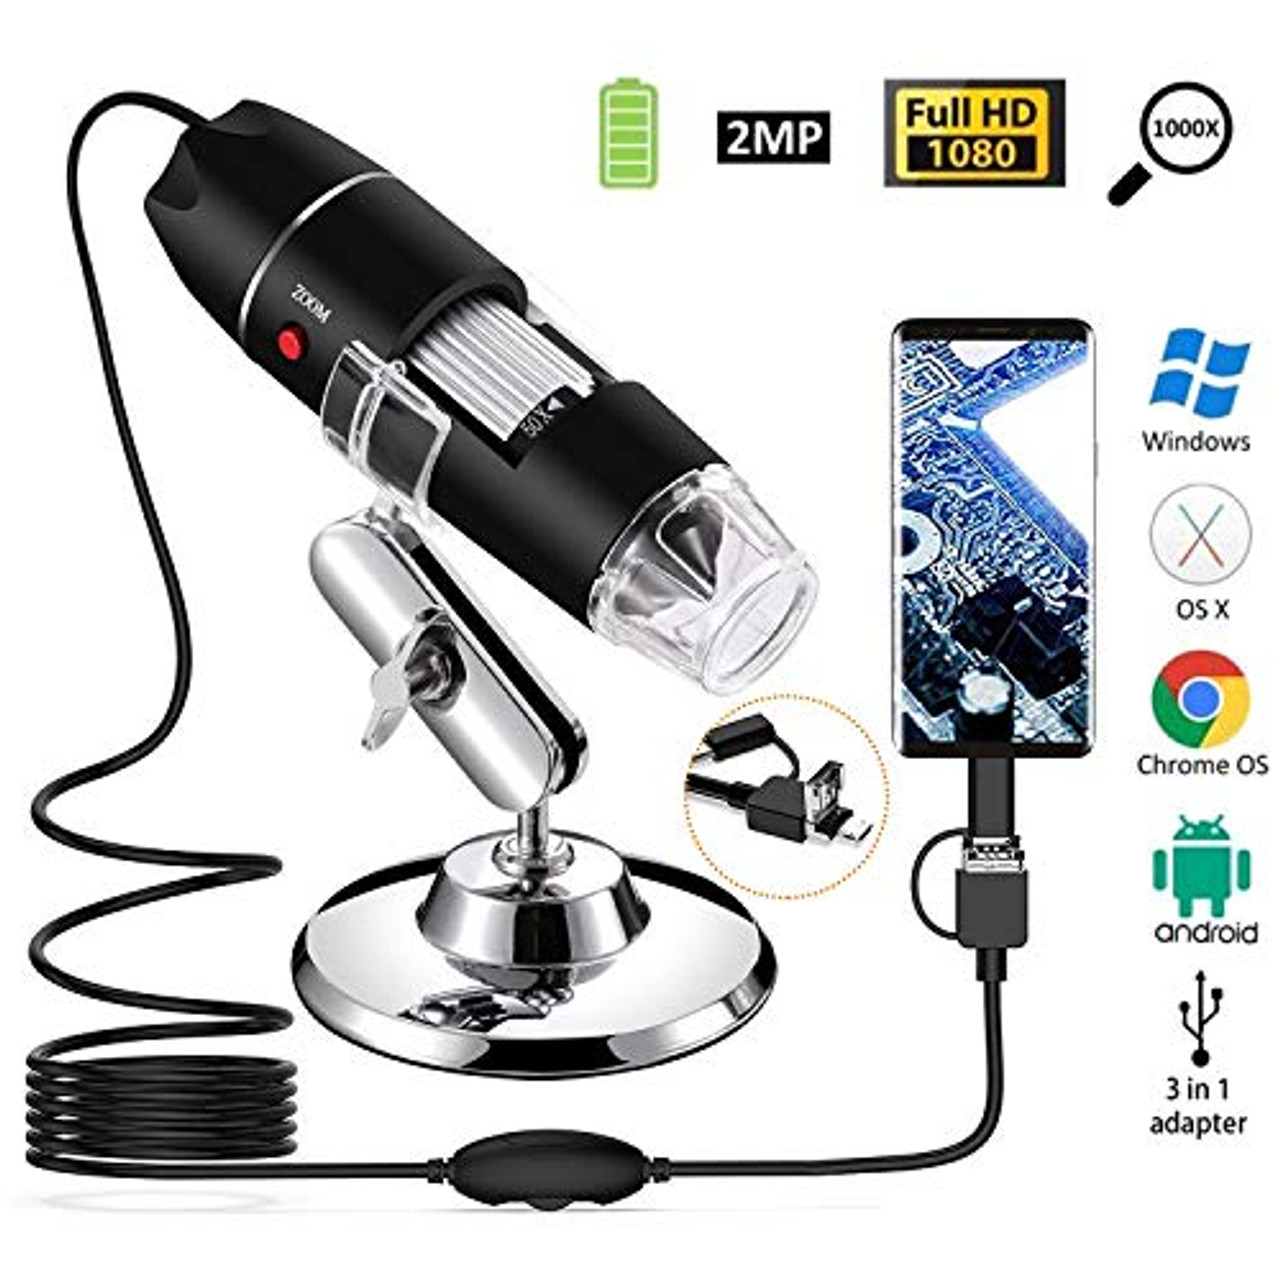 LED Microscope Endoscope 50X-500X 2MP USB Compatible Digital Magnifier for Computer with Holder 